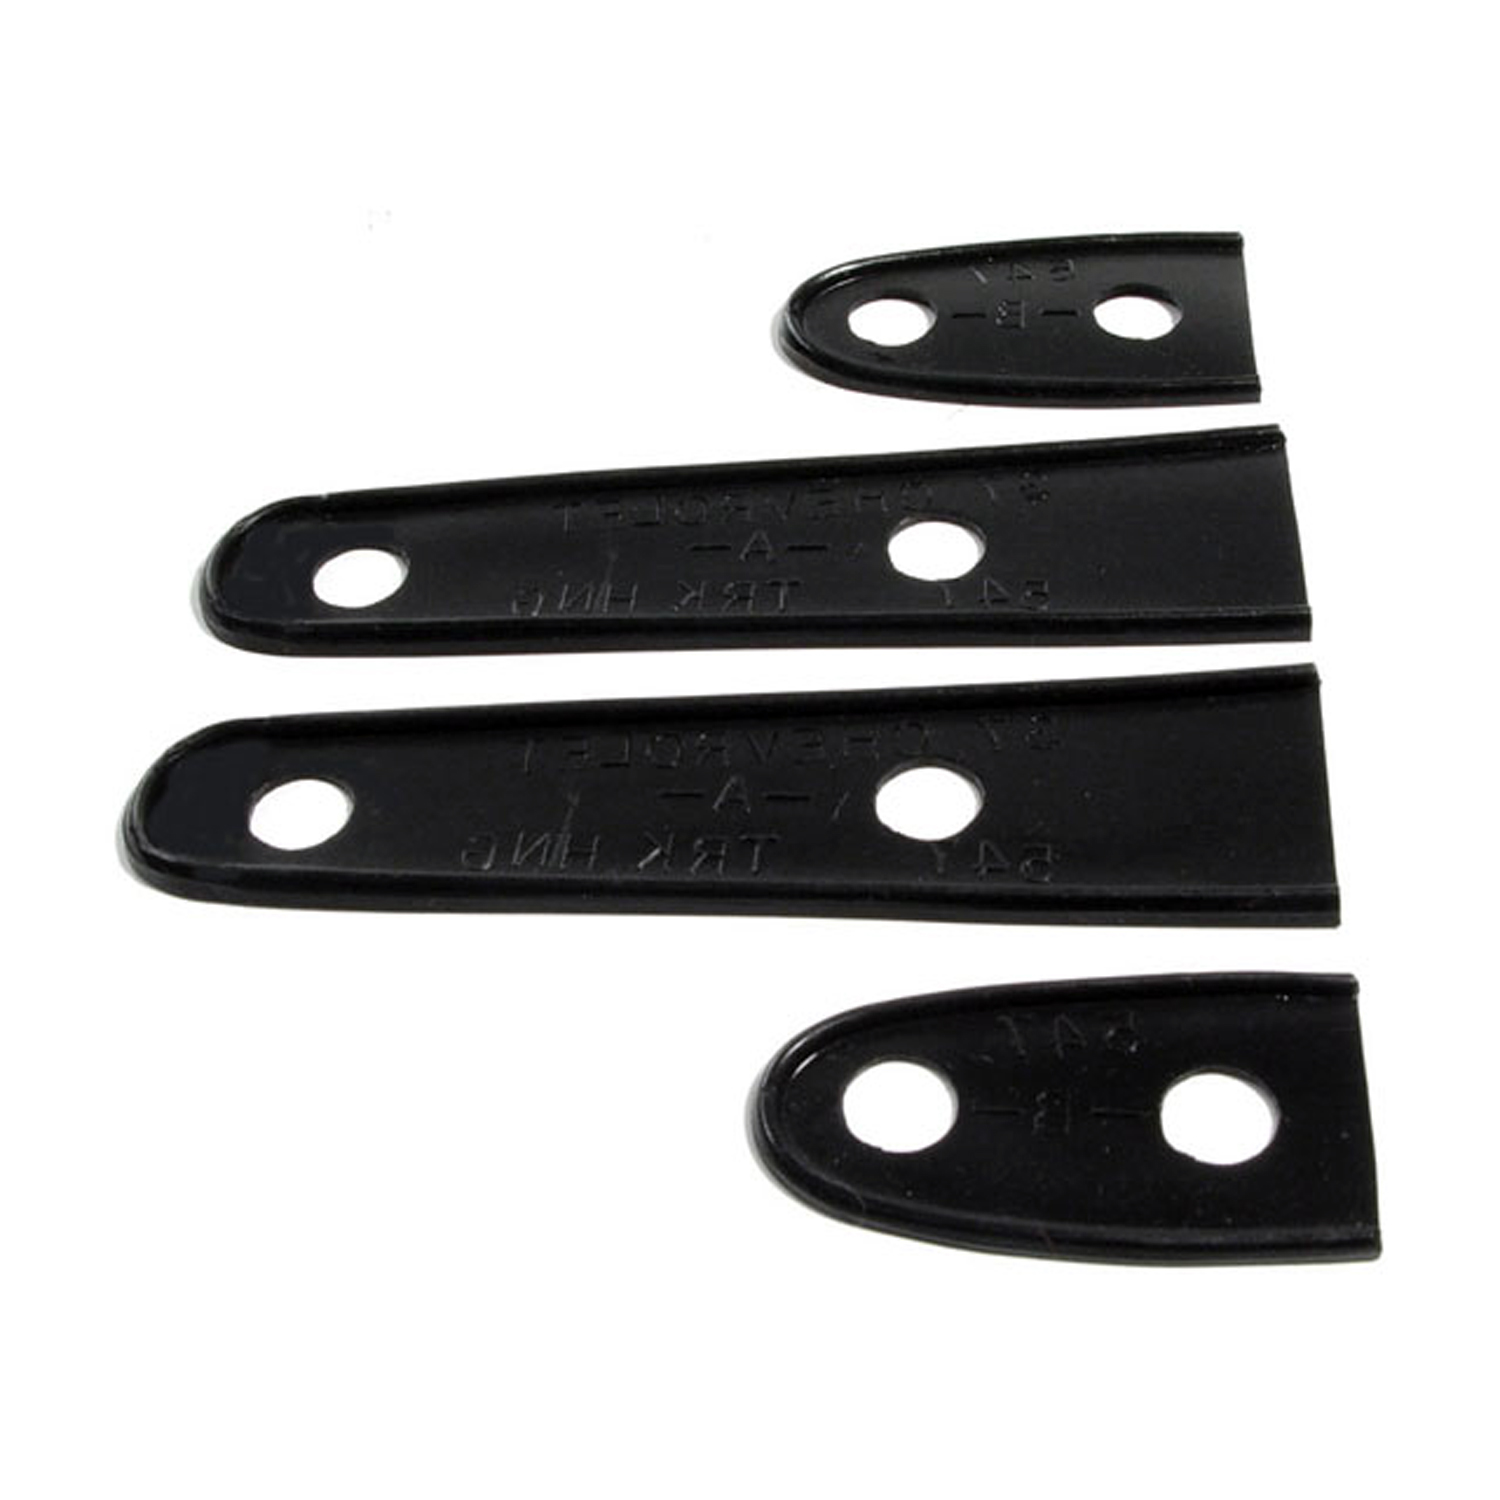 1938 Chevrolet Master Trunk Hinge Pads.  1-3/8 wide X 7-3/4 long.  4-Piece Set-MP 547